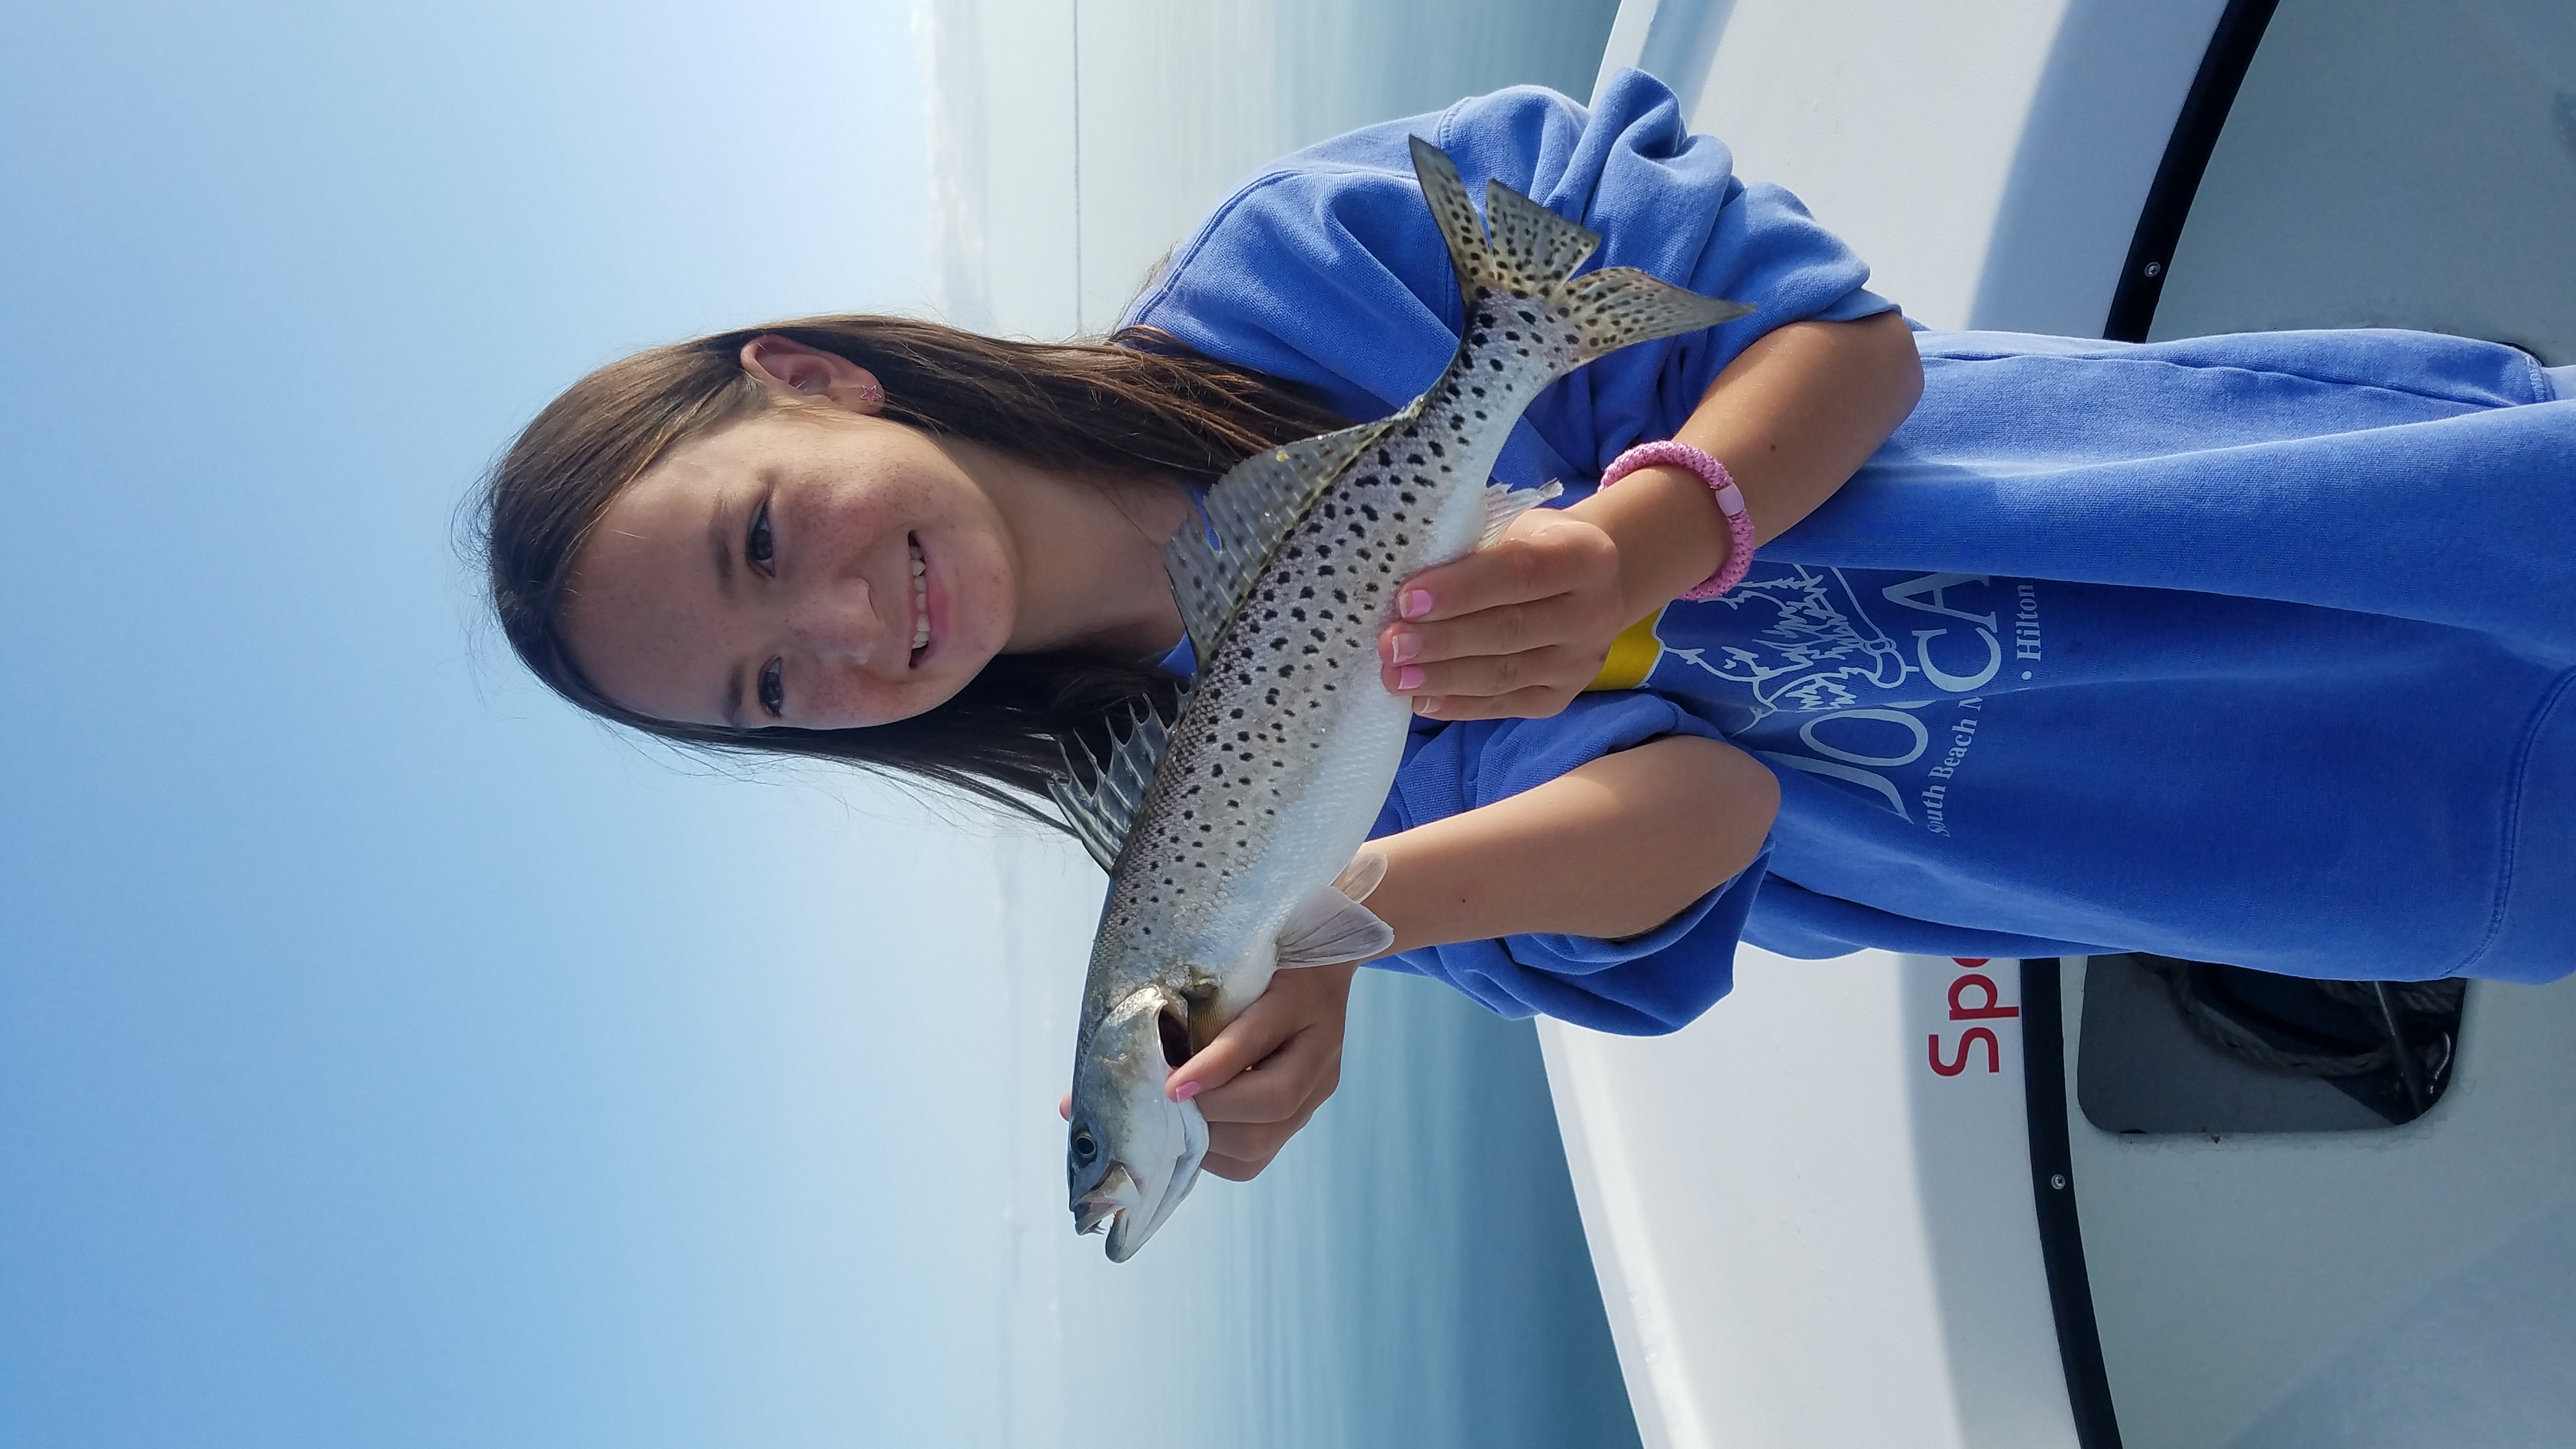 Speck-Tackler Fishing Teach's Lair Hatteras Inshore Charters